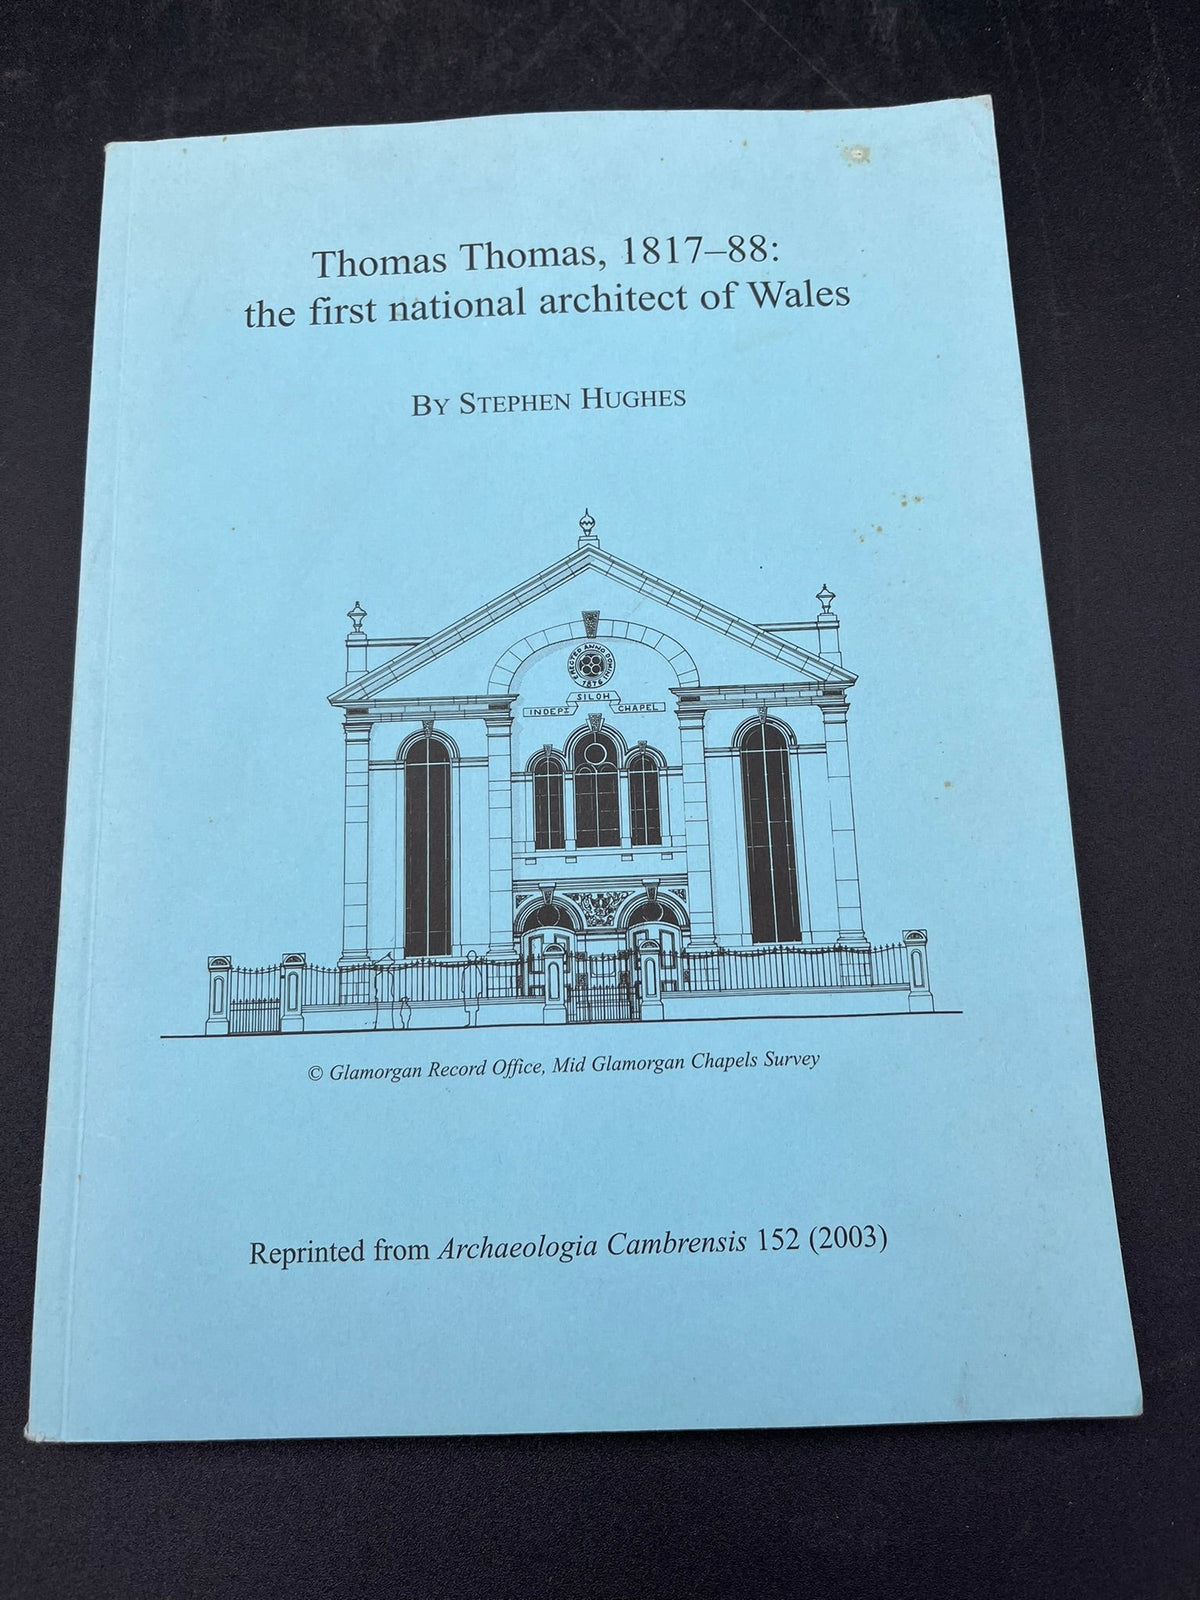 Thomas Thomas, 1817-88: the first national architect of Wales